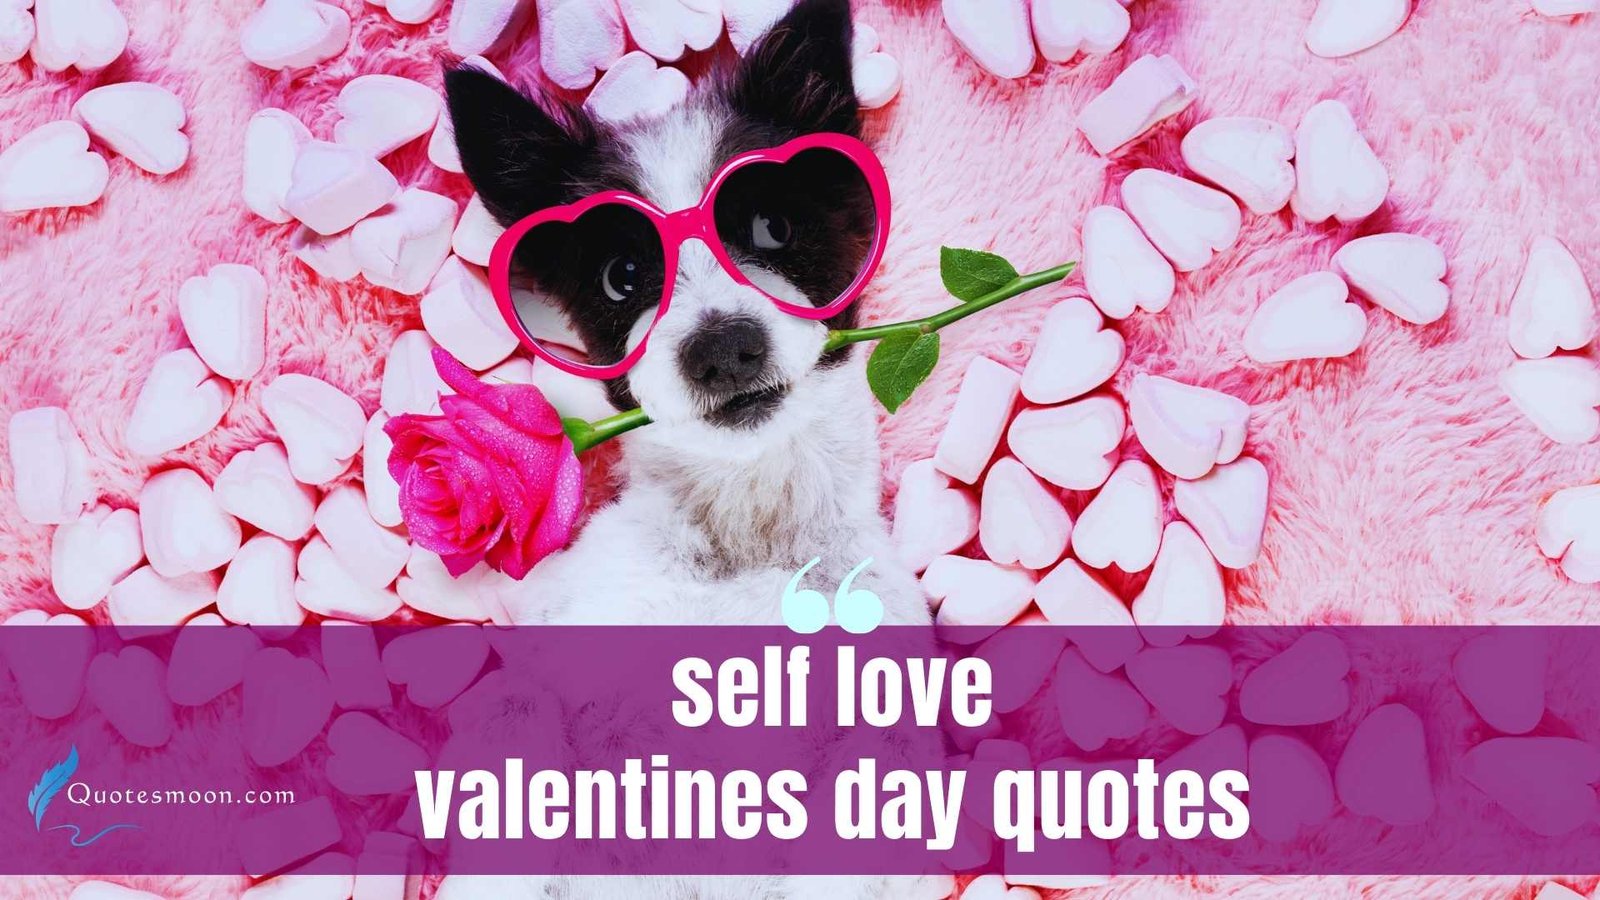 self love valentines day quotes images